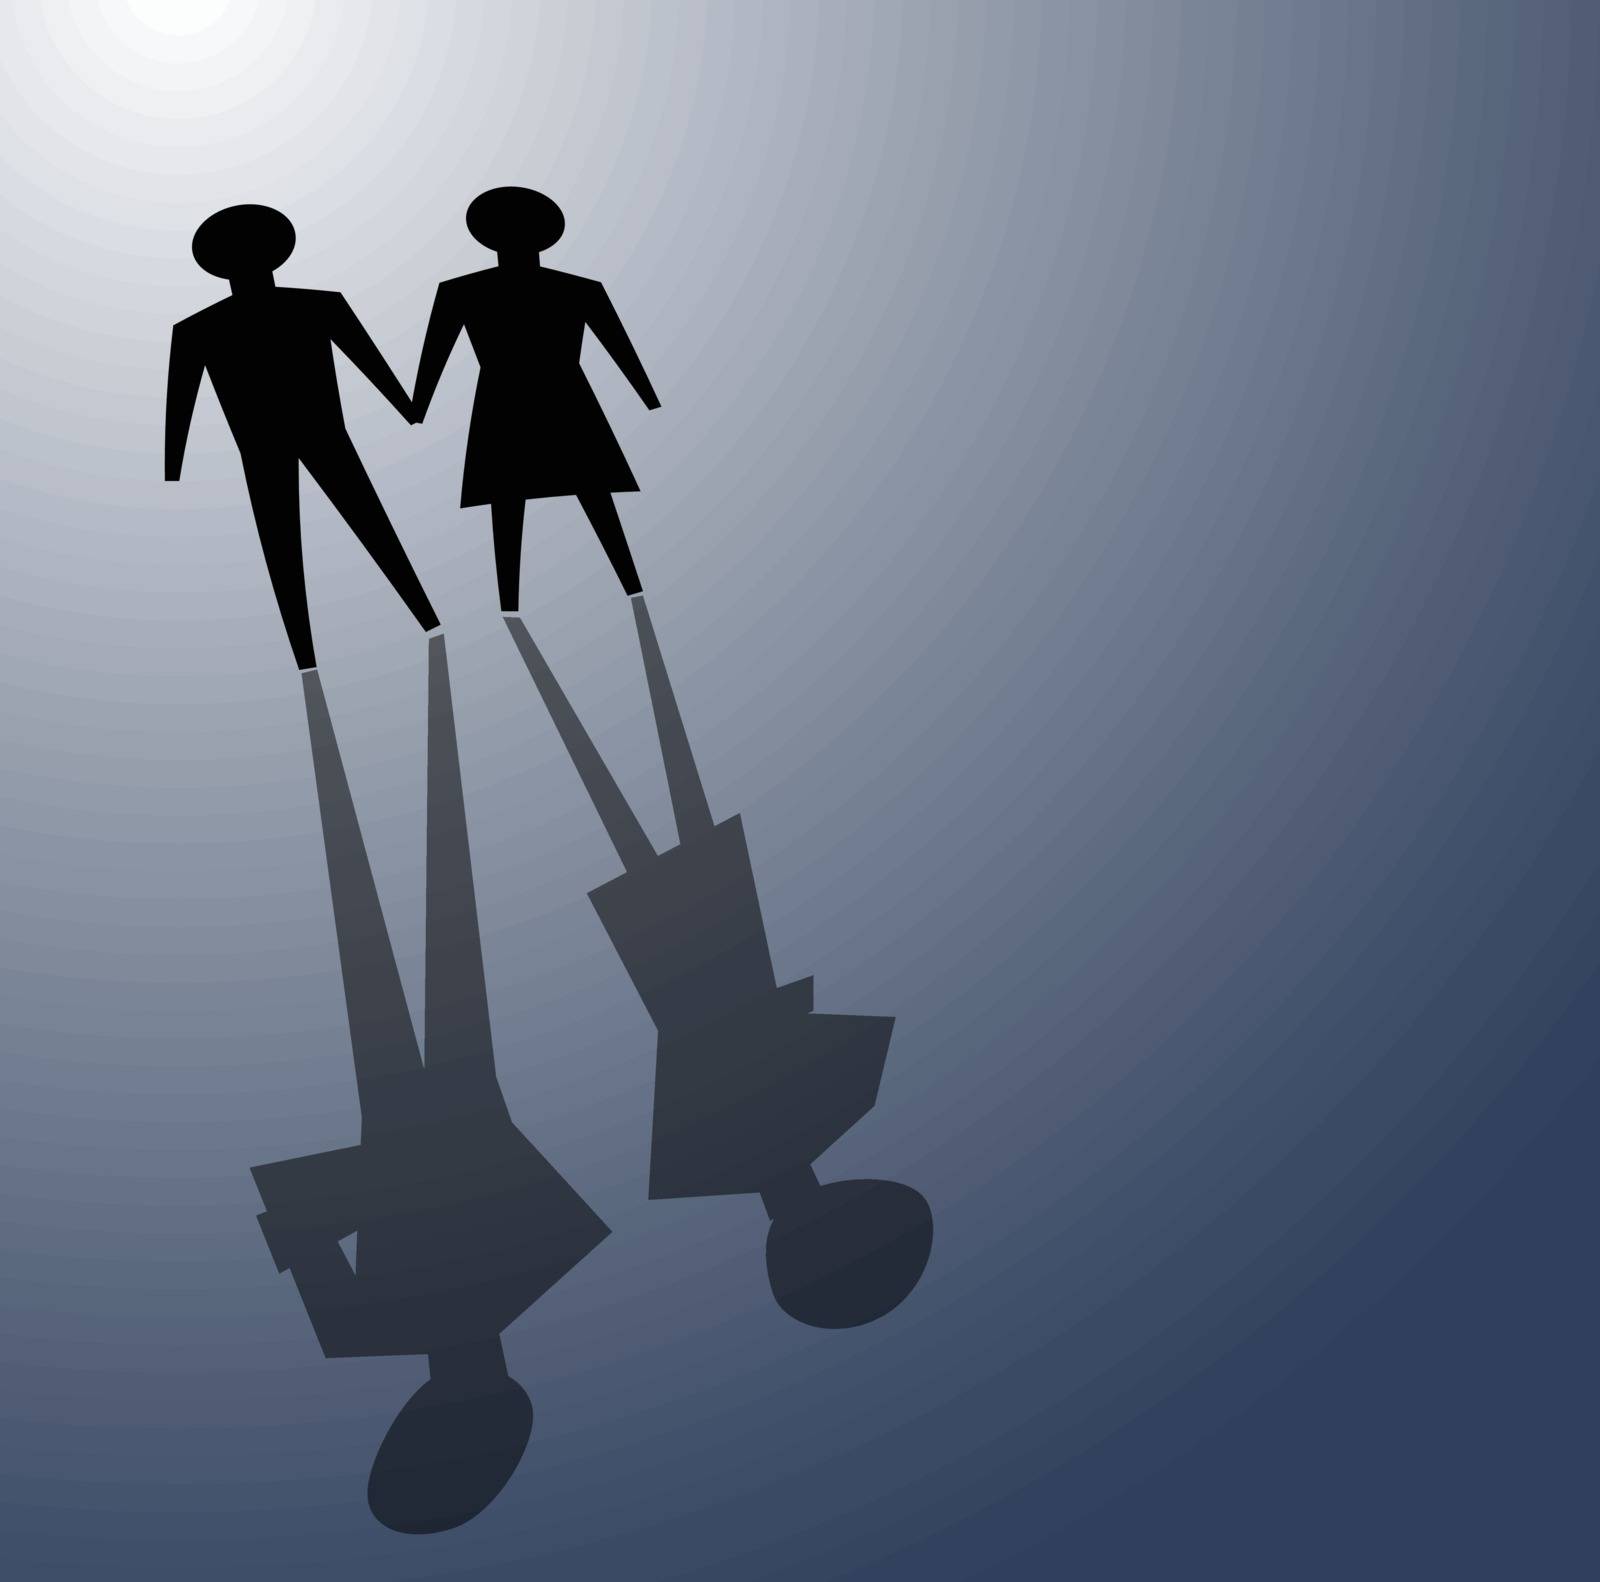 illustrations of broken relationship, couple shadow was ignoring each other.